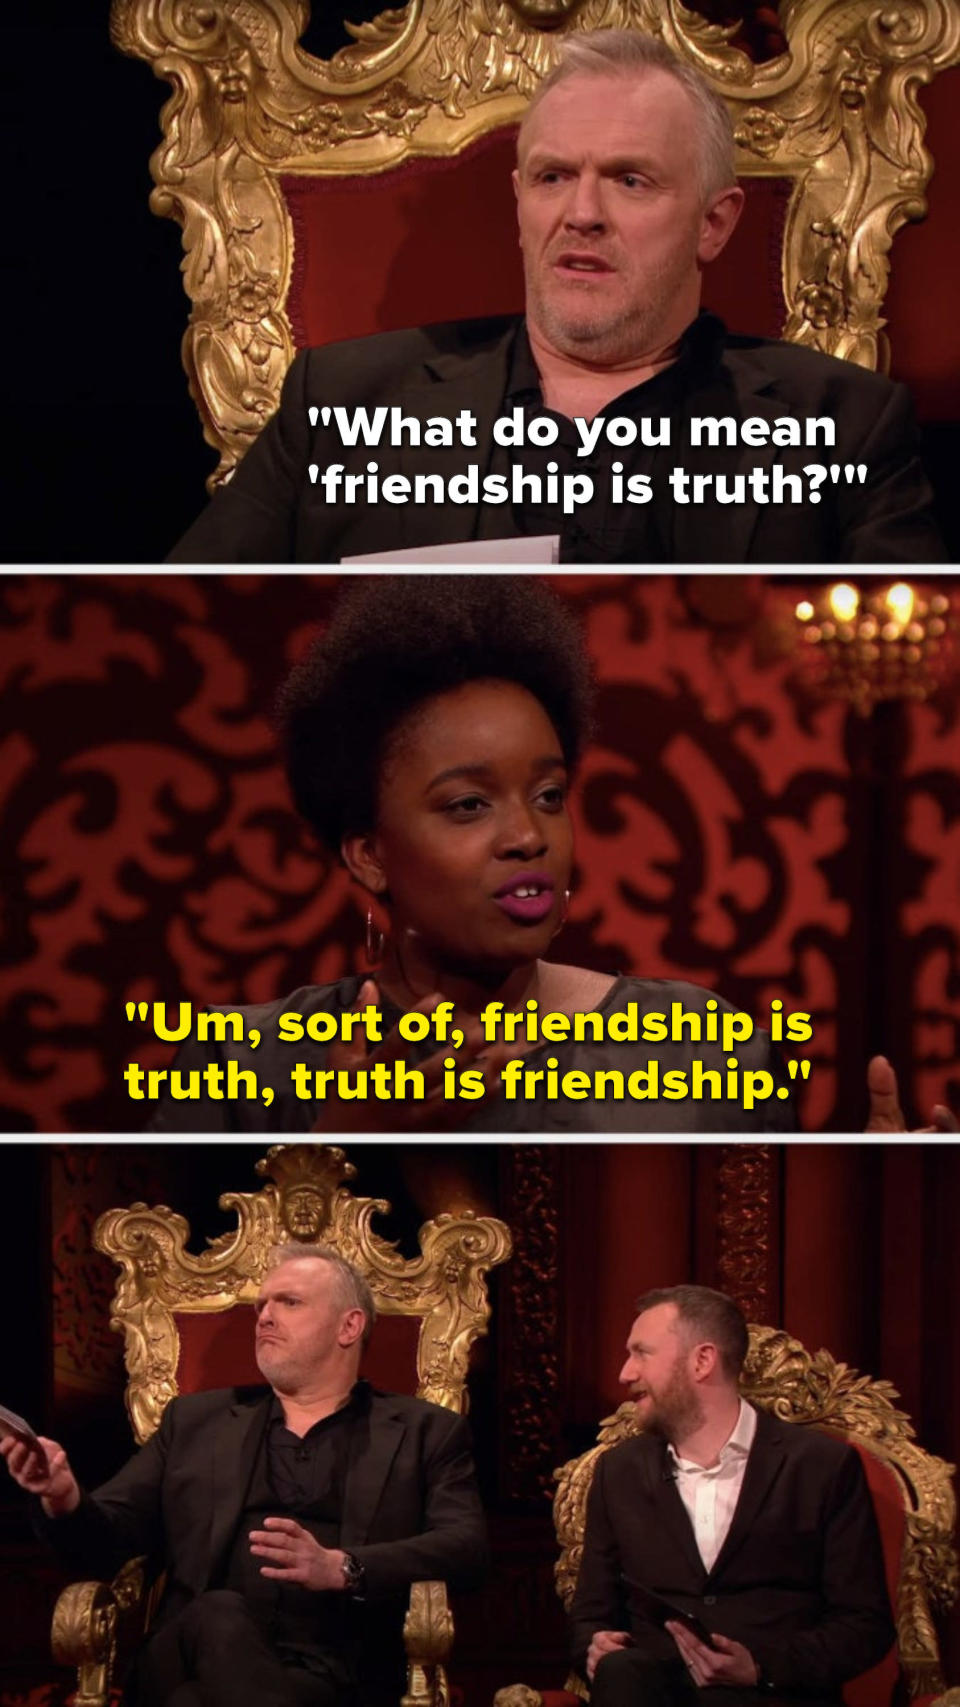 On Taskmaster, Greg says, What do you mean friendship is truth, and Lolly Adefope says, Um, sort of, friendship is truth, truth is friendship